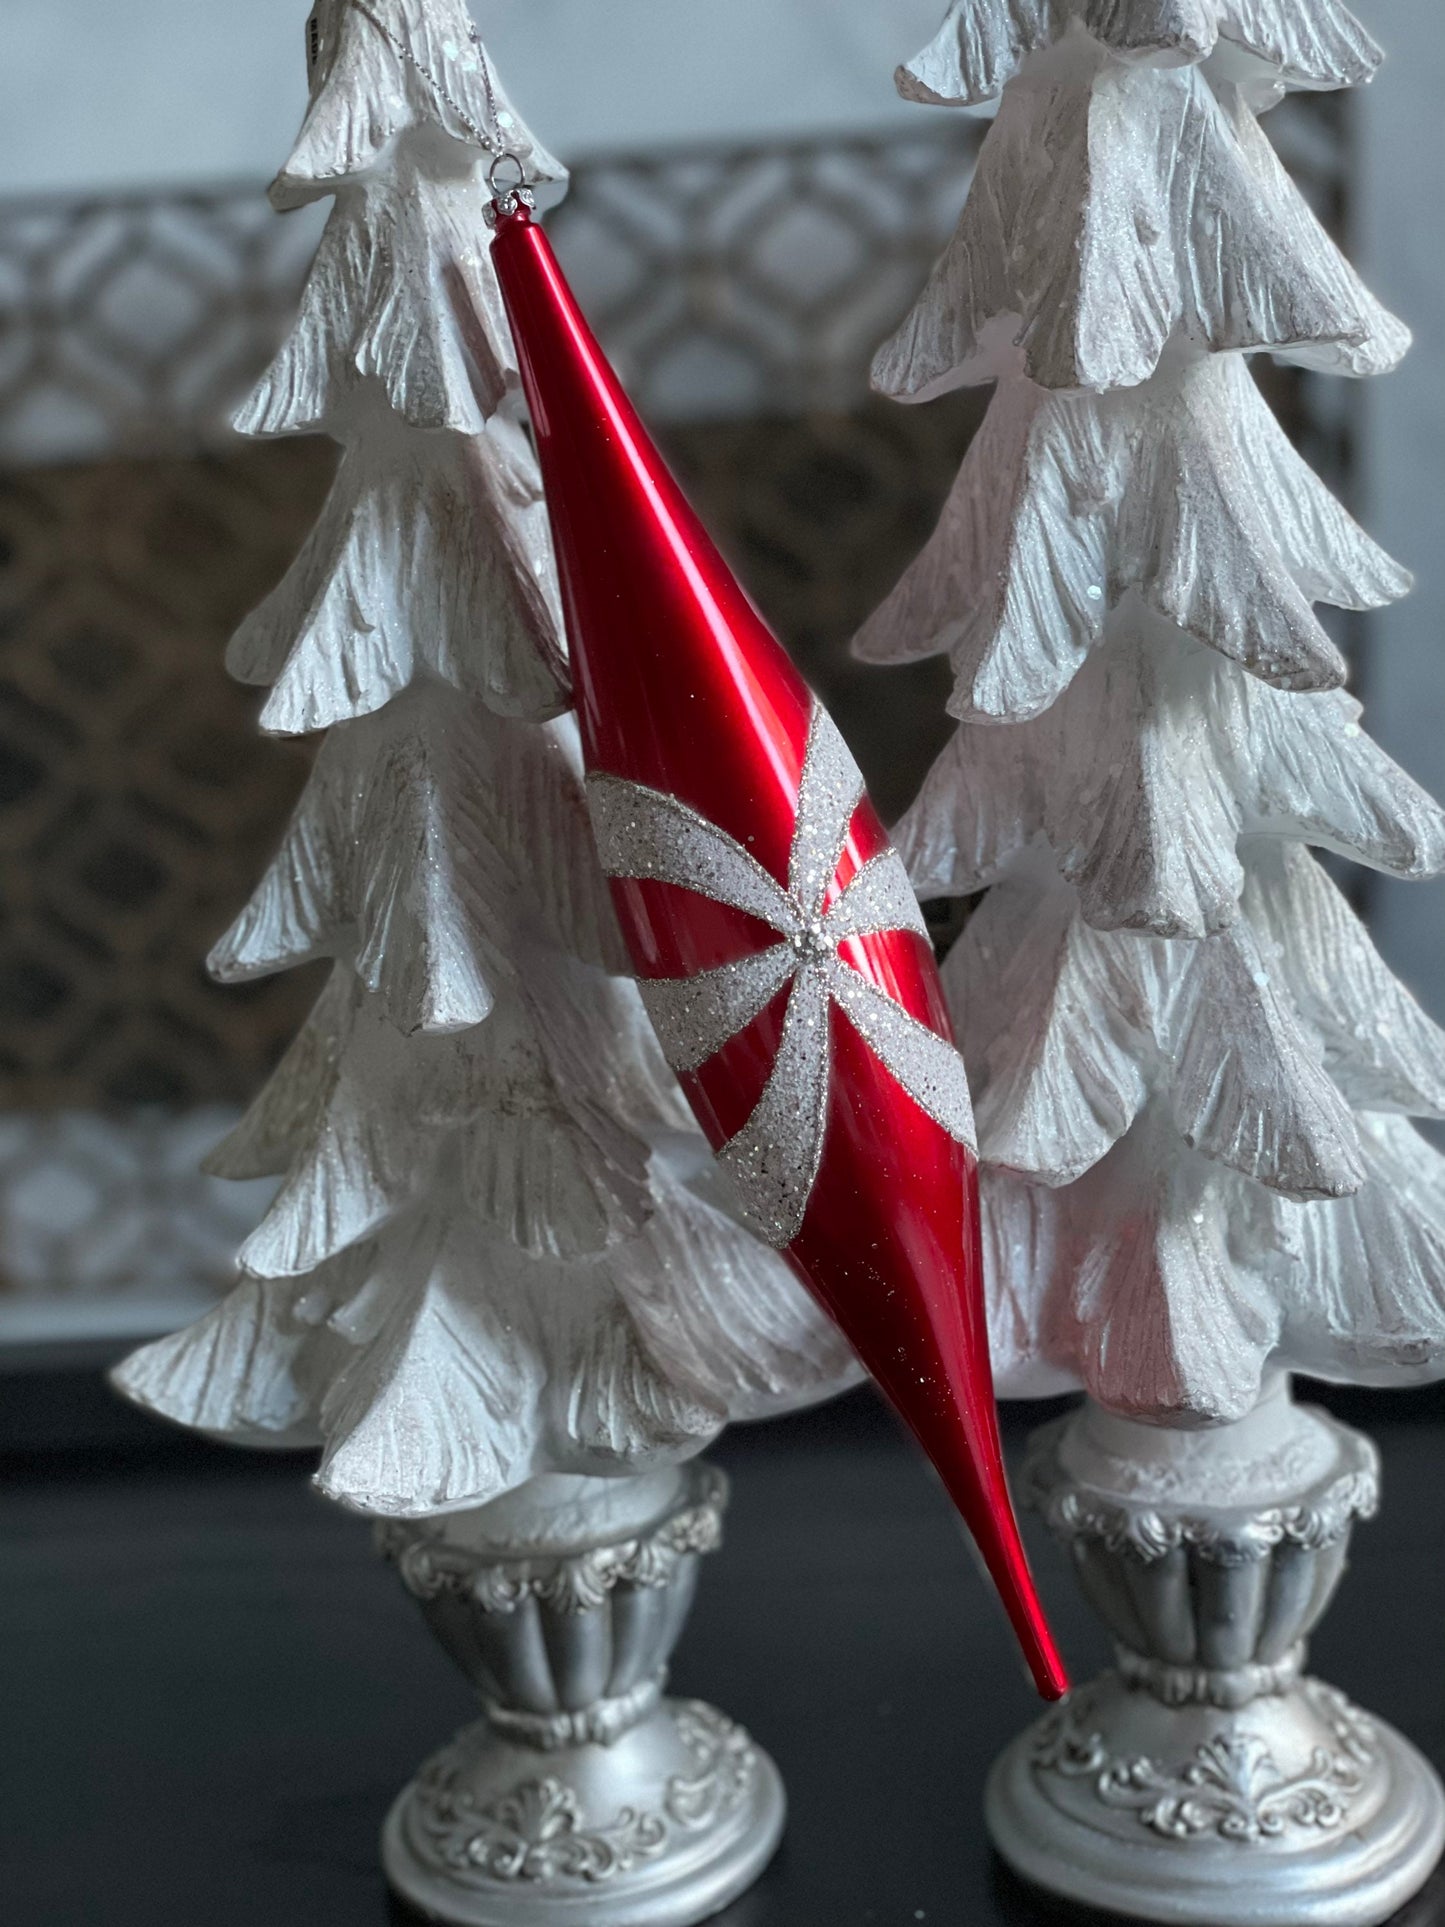 13” finial red and white glitter. Oval drop ornament.*